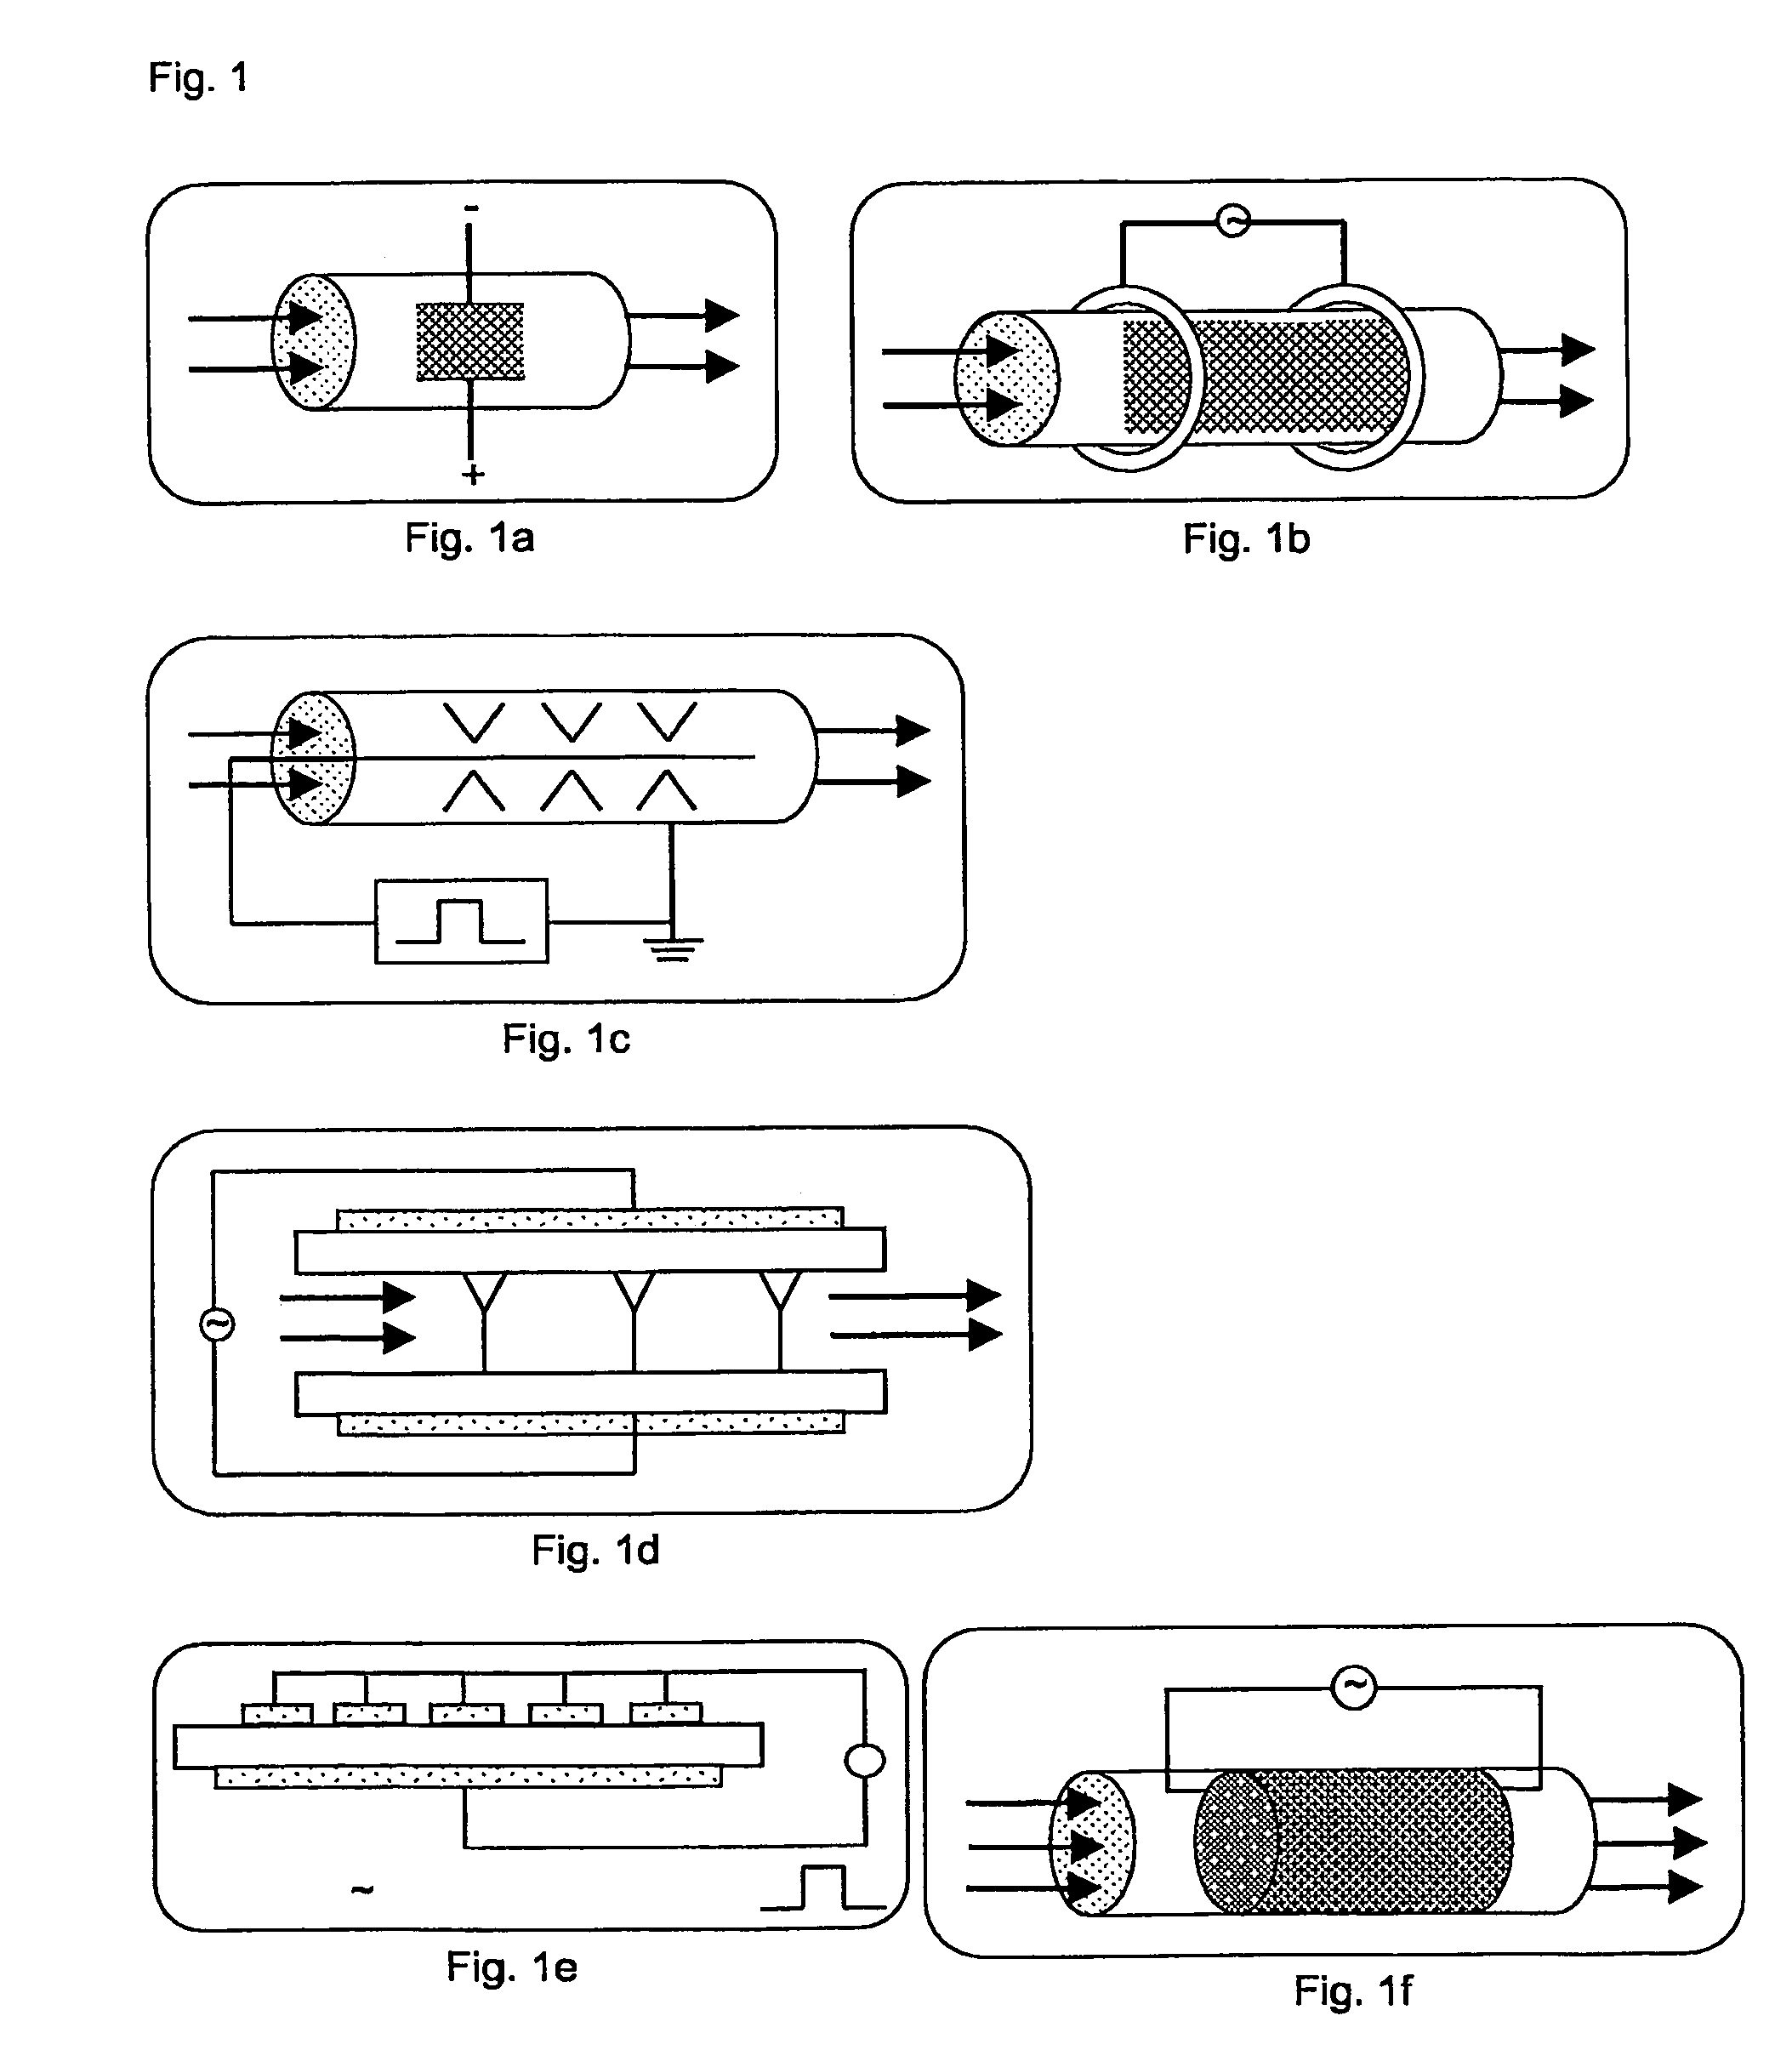 Process and apparatus for purifying silicon tetrachloride or germanium tetrachloride containing hydrogen compounds